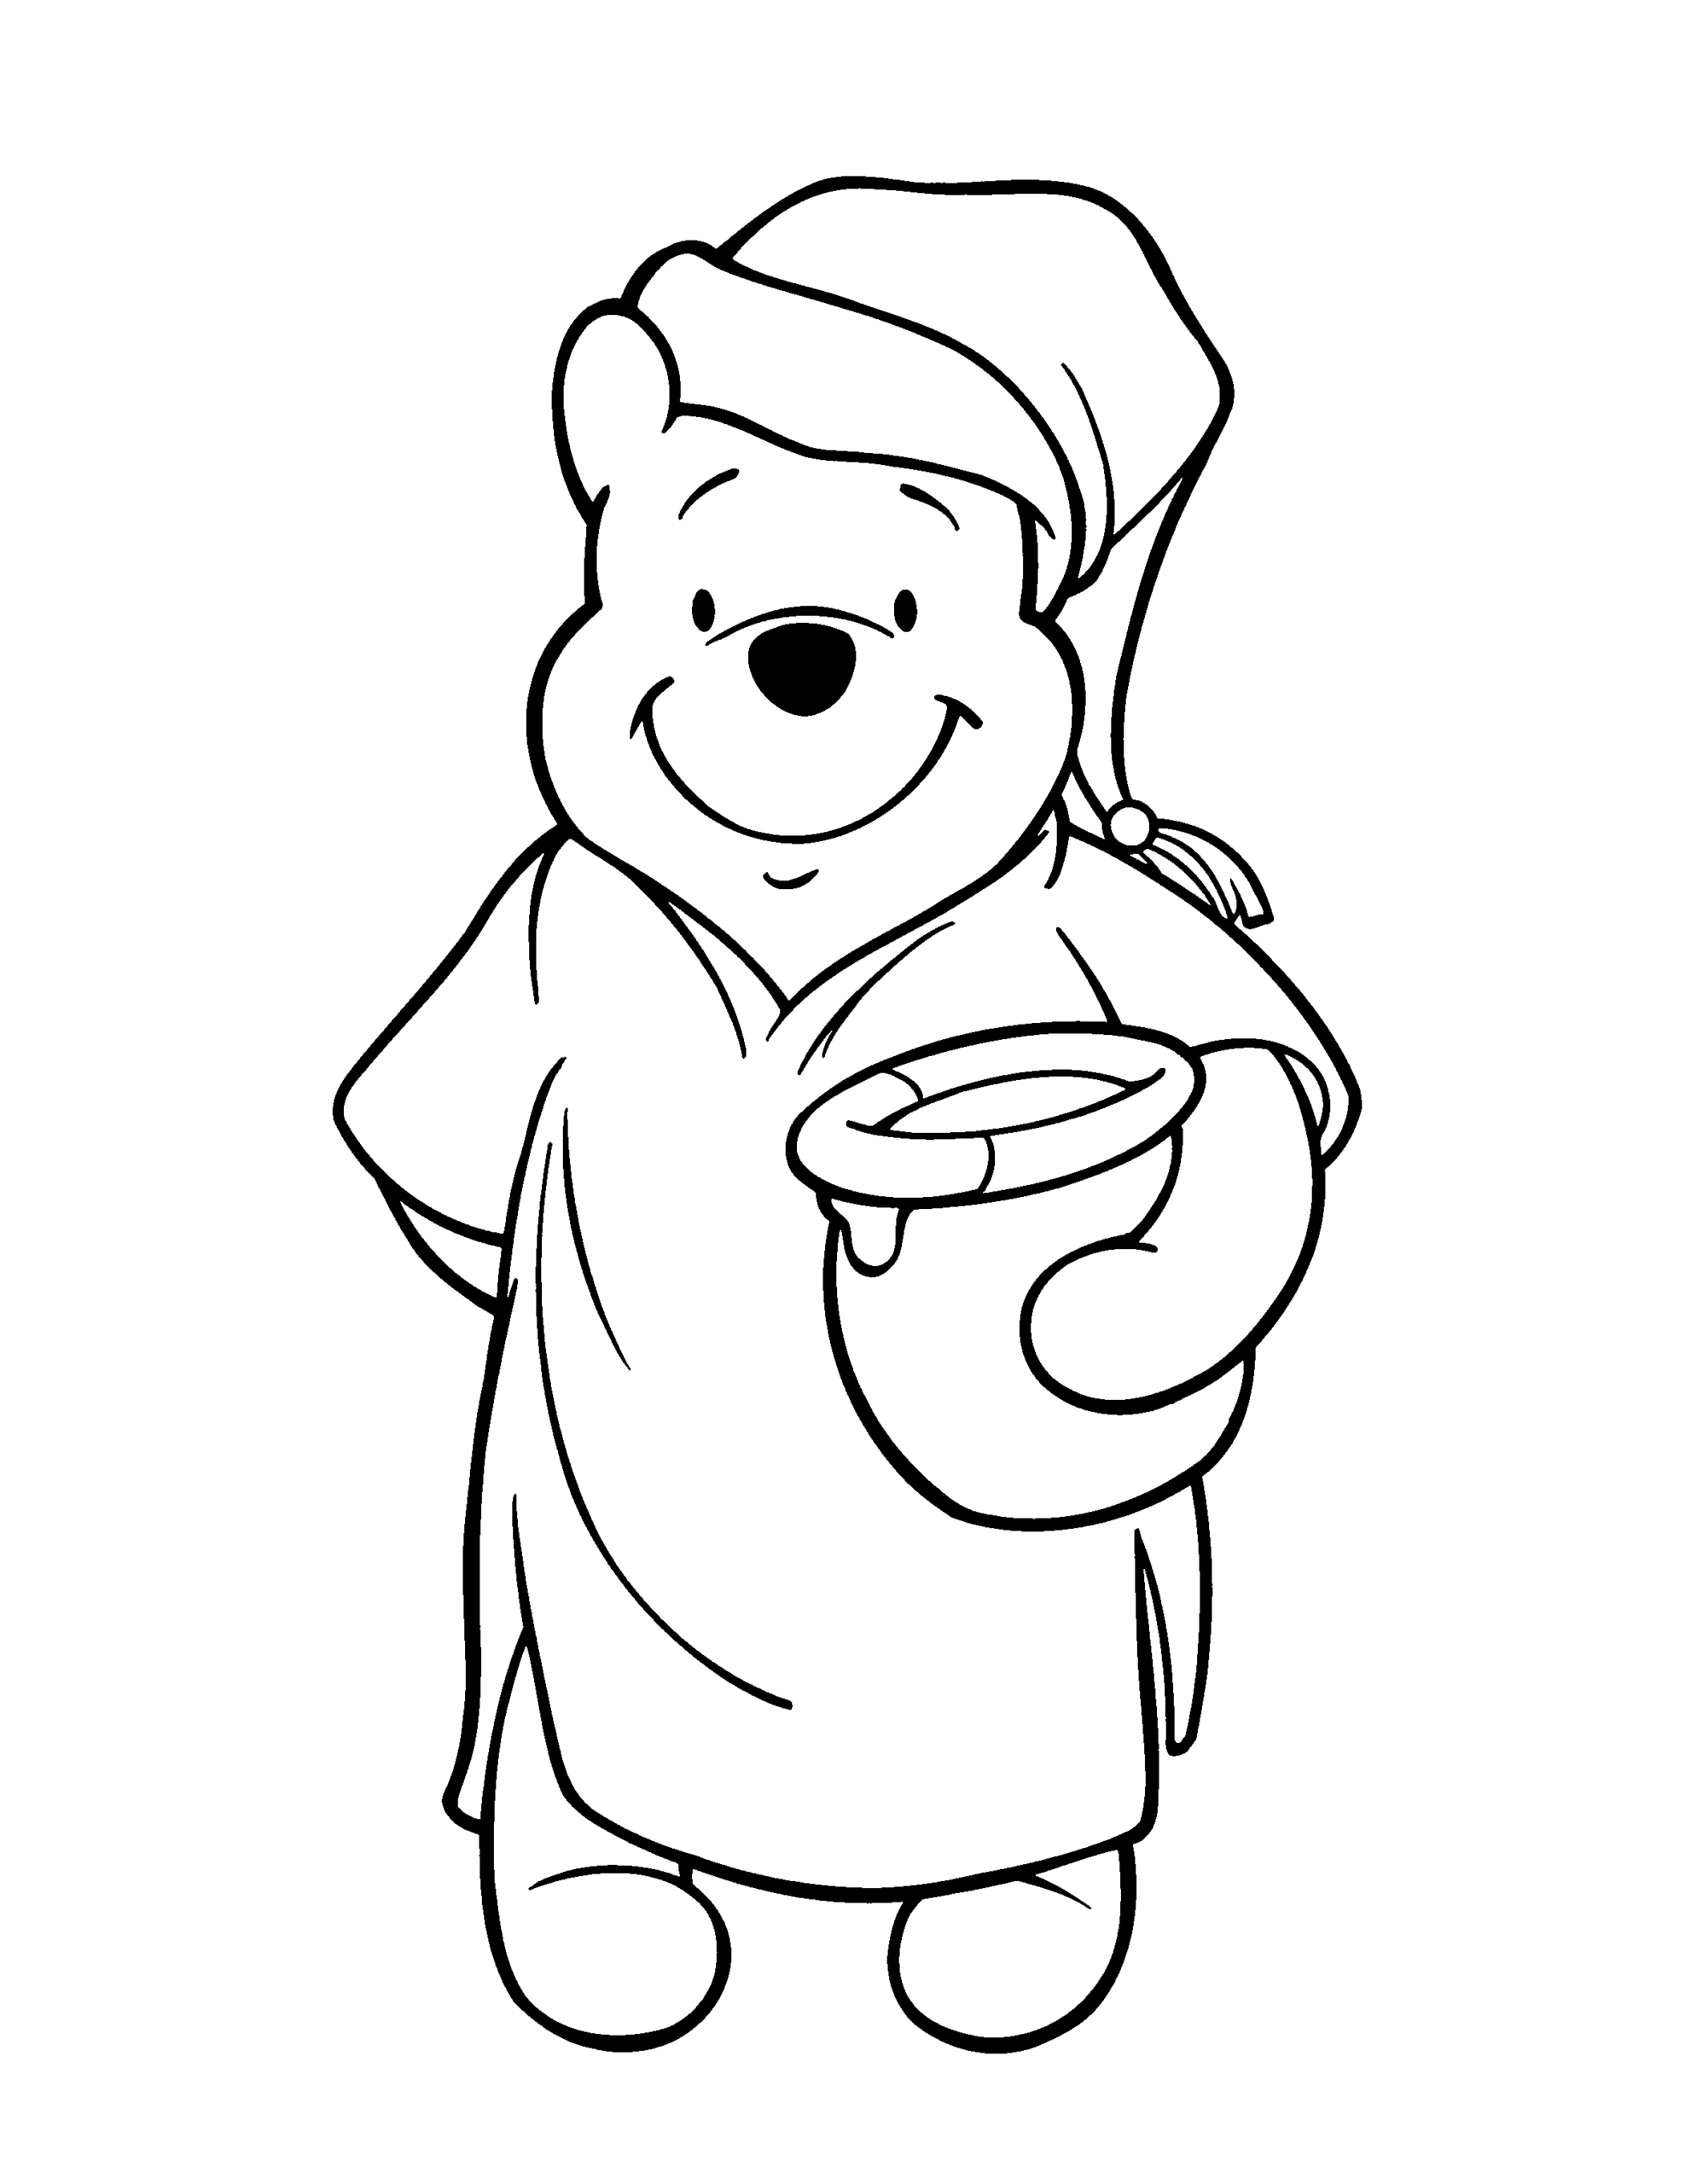 Winnie the Pooh Coloring Pages Cartoons winnie the pooh 65 Printable 2020 7182 Coloring4free